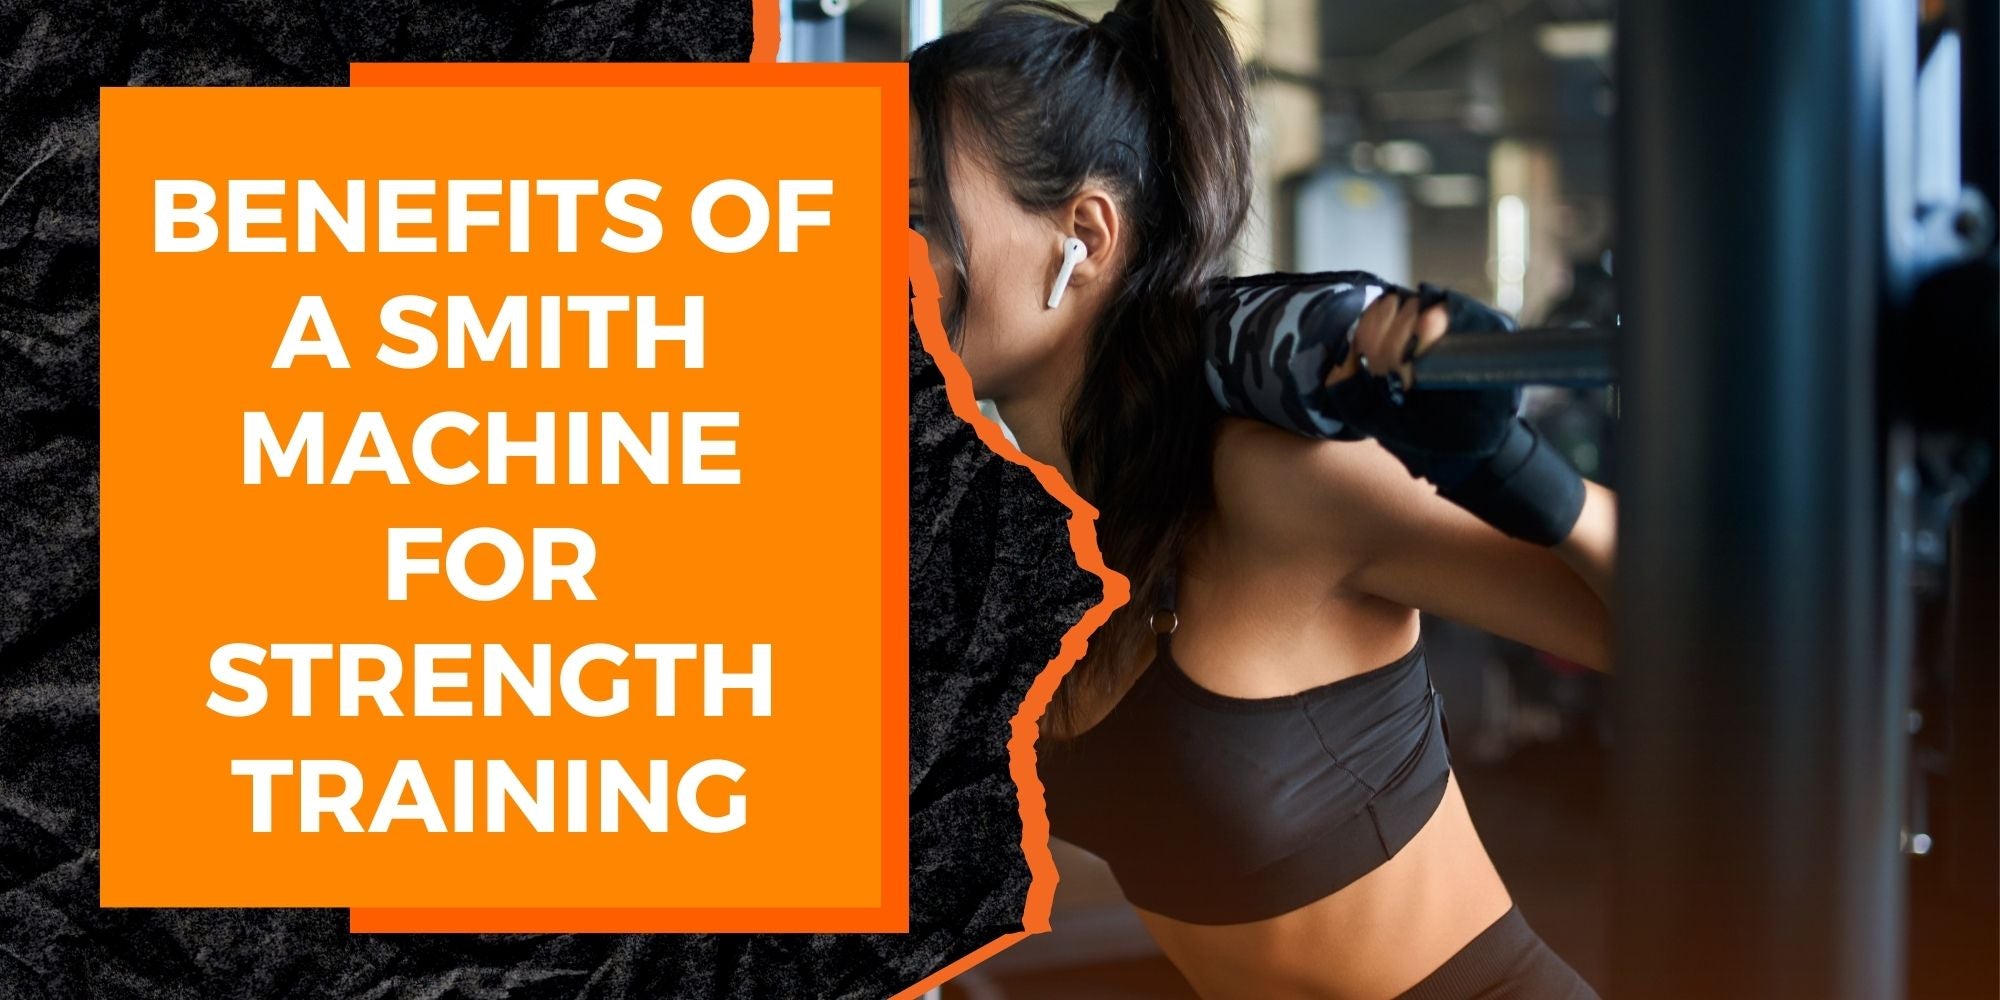 The Benefits of a Smith Machine for Strength Training